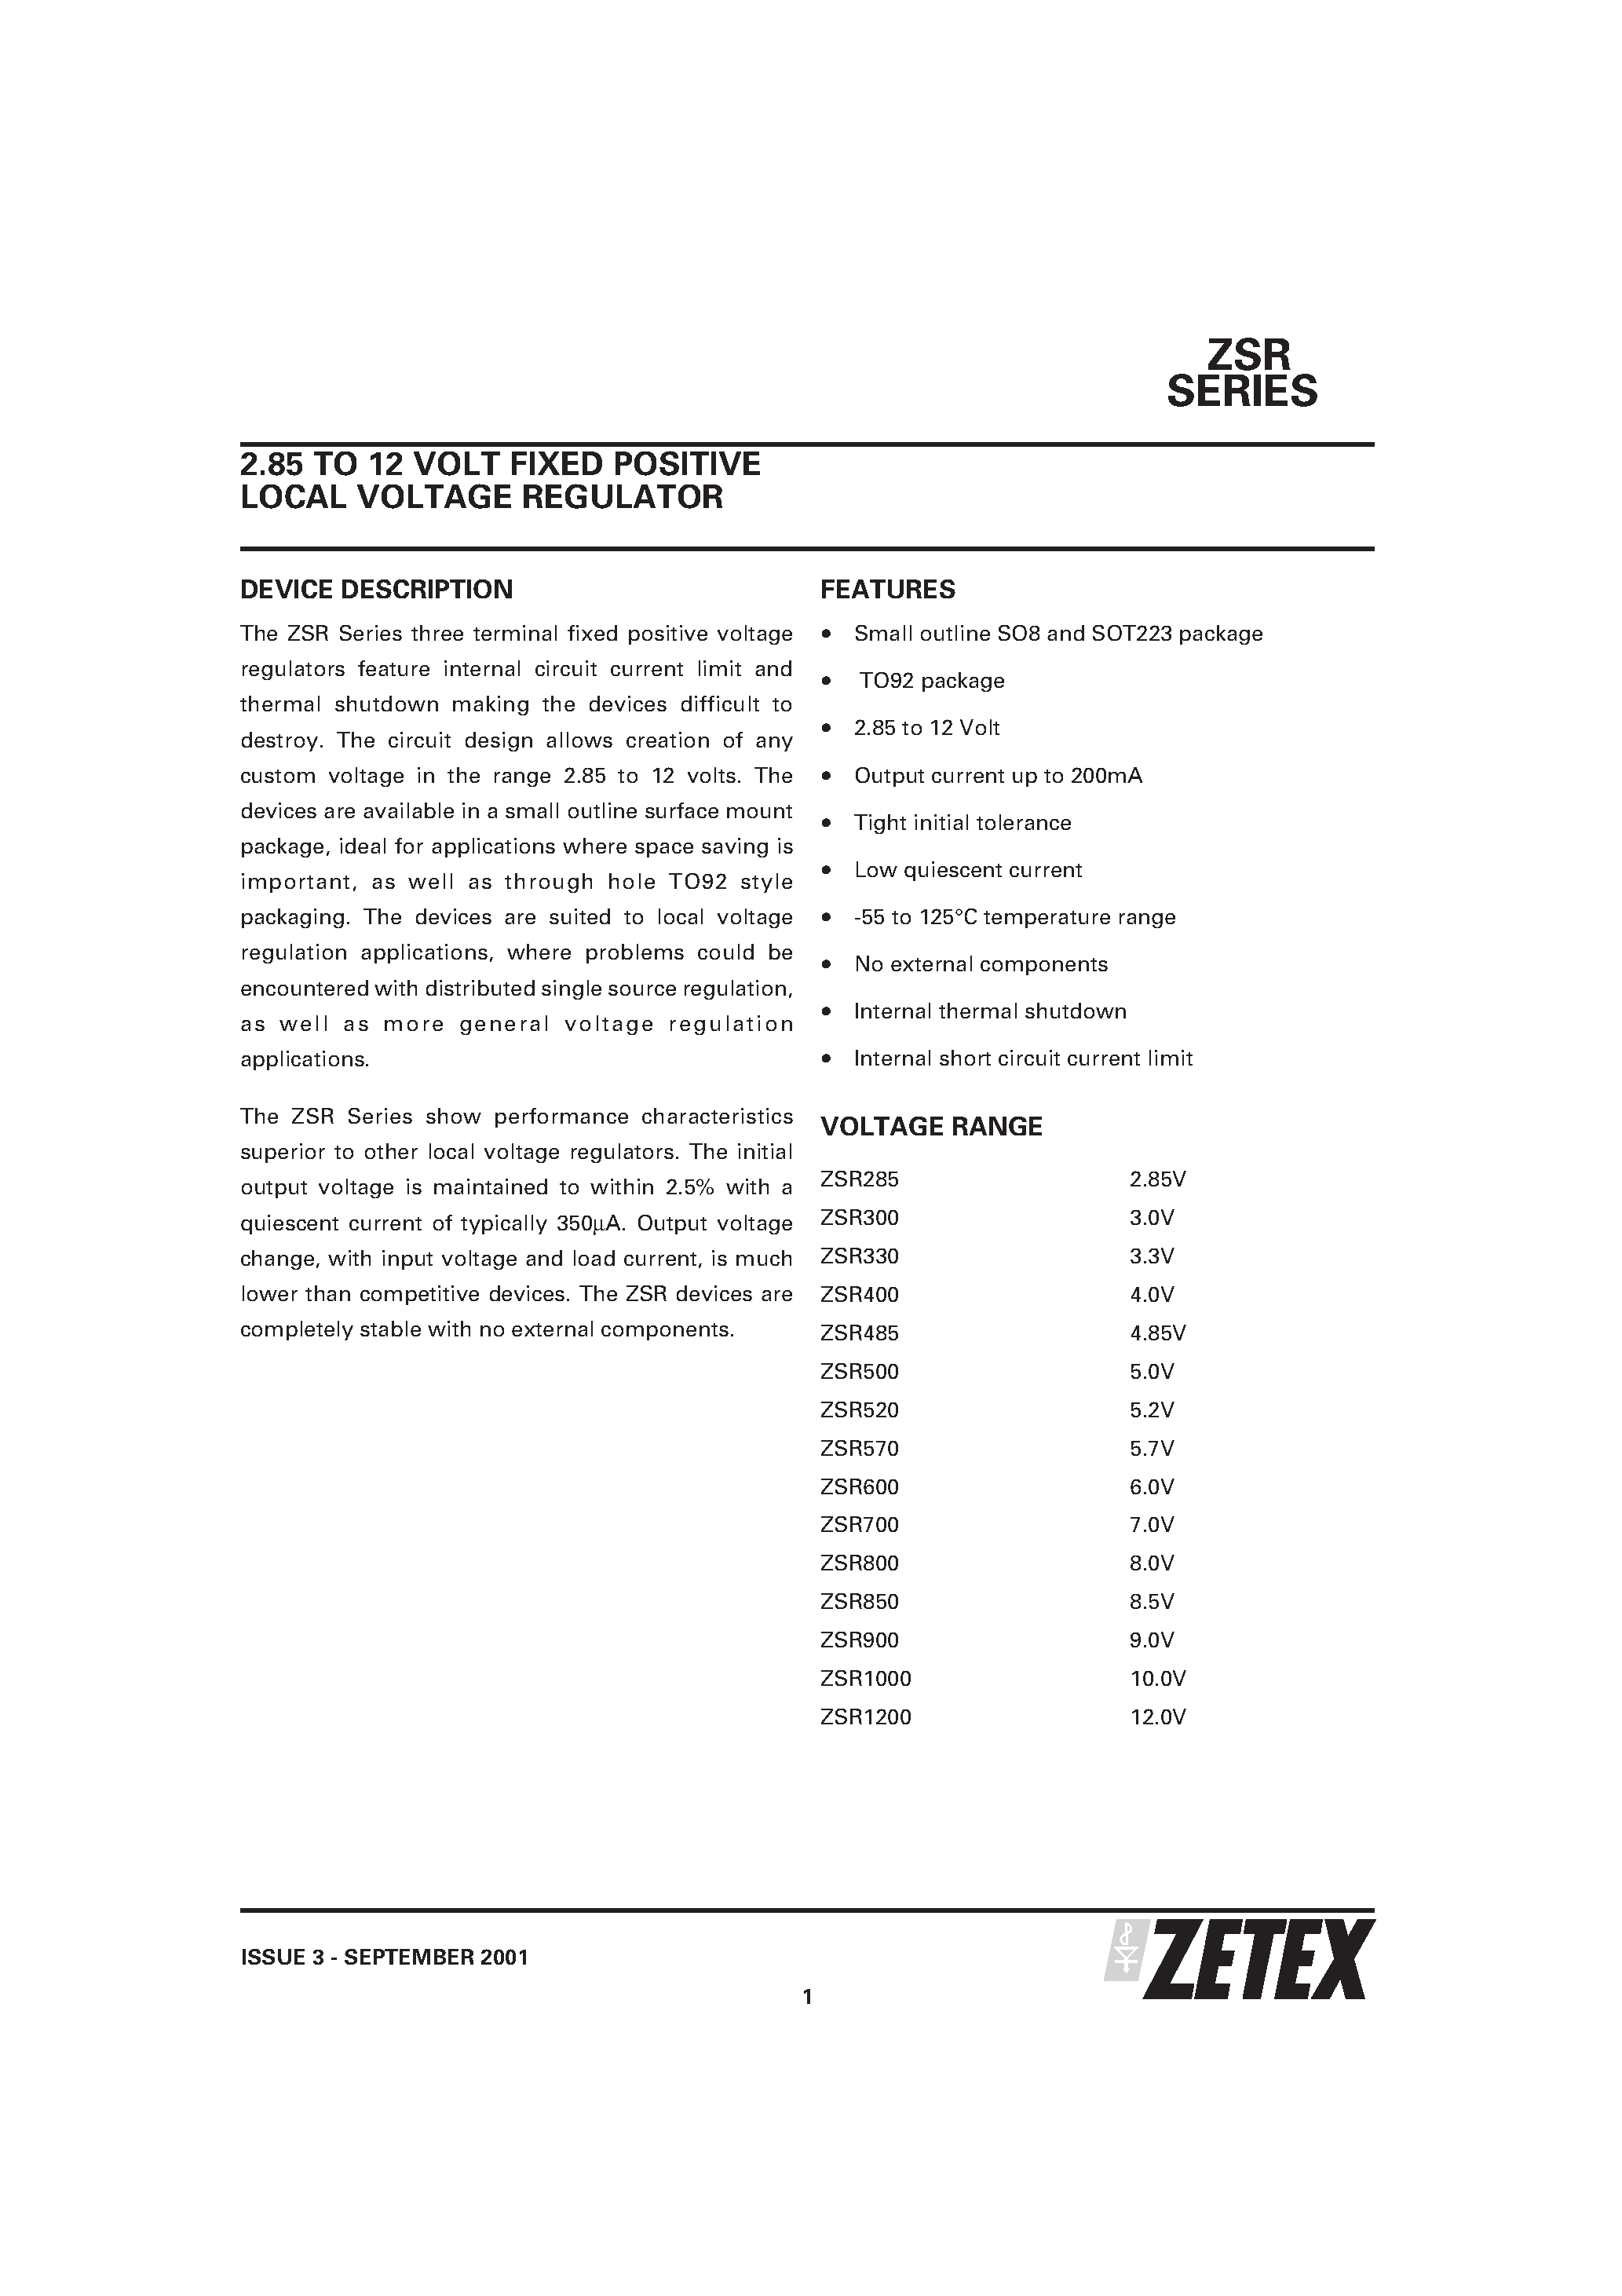 Datasheet ZSR700 - 2.85 TO 12 VOLT FIXED POSITIVE LOCAL VOLTAGE REGULATOR page 1